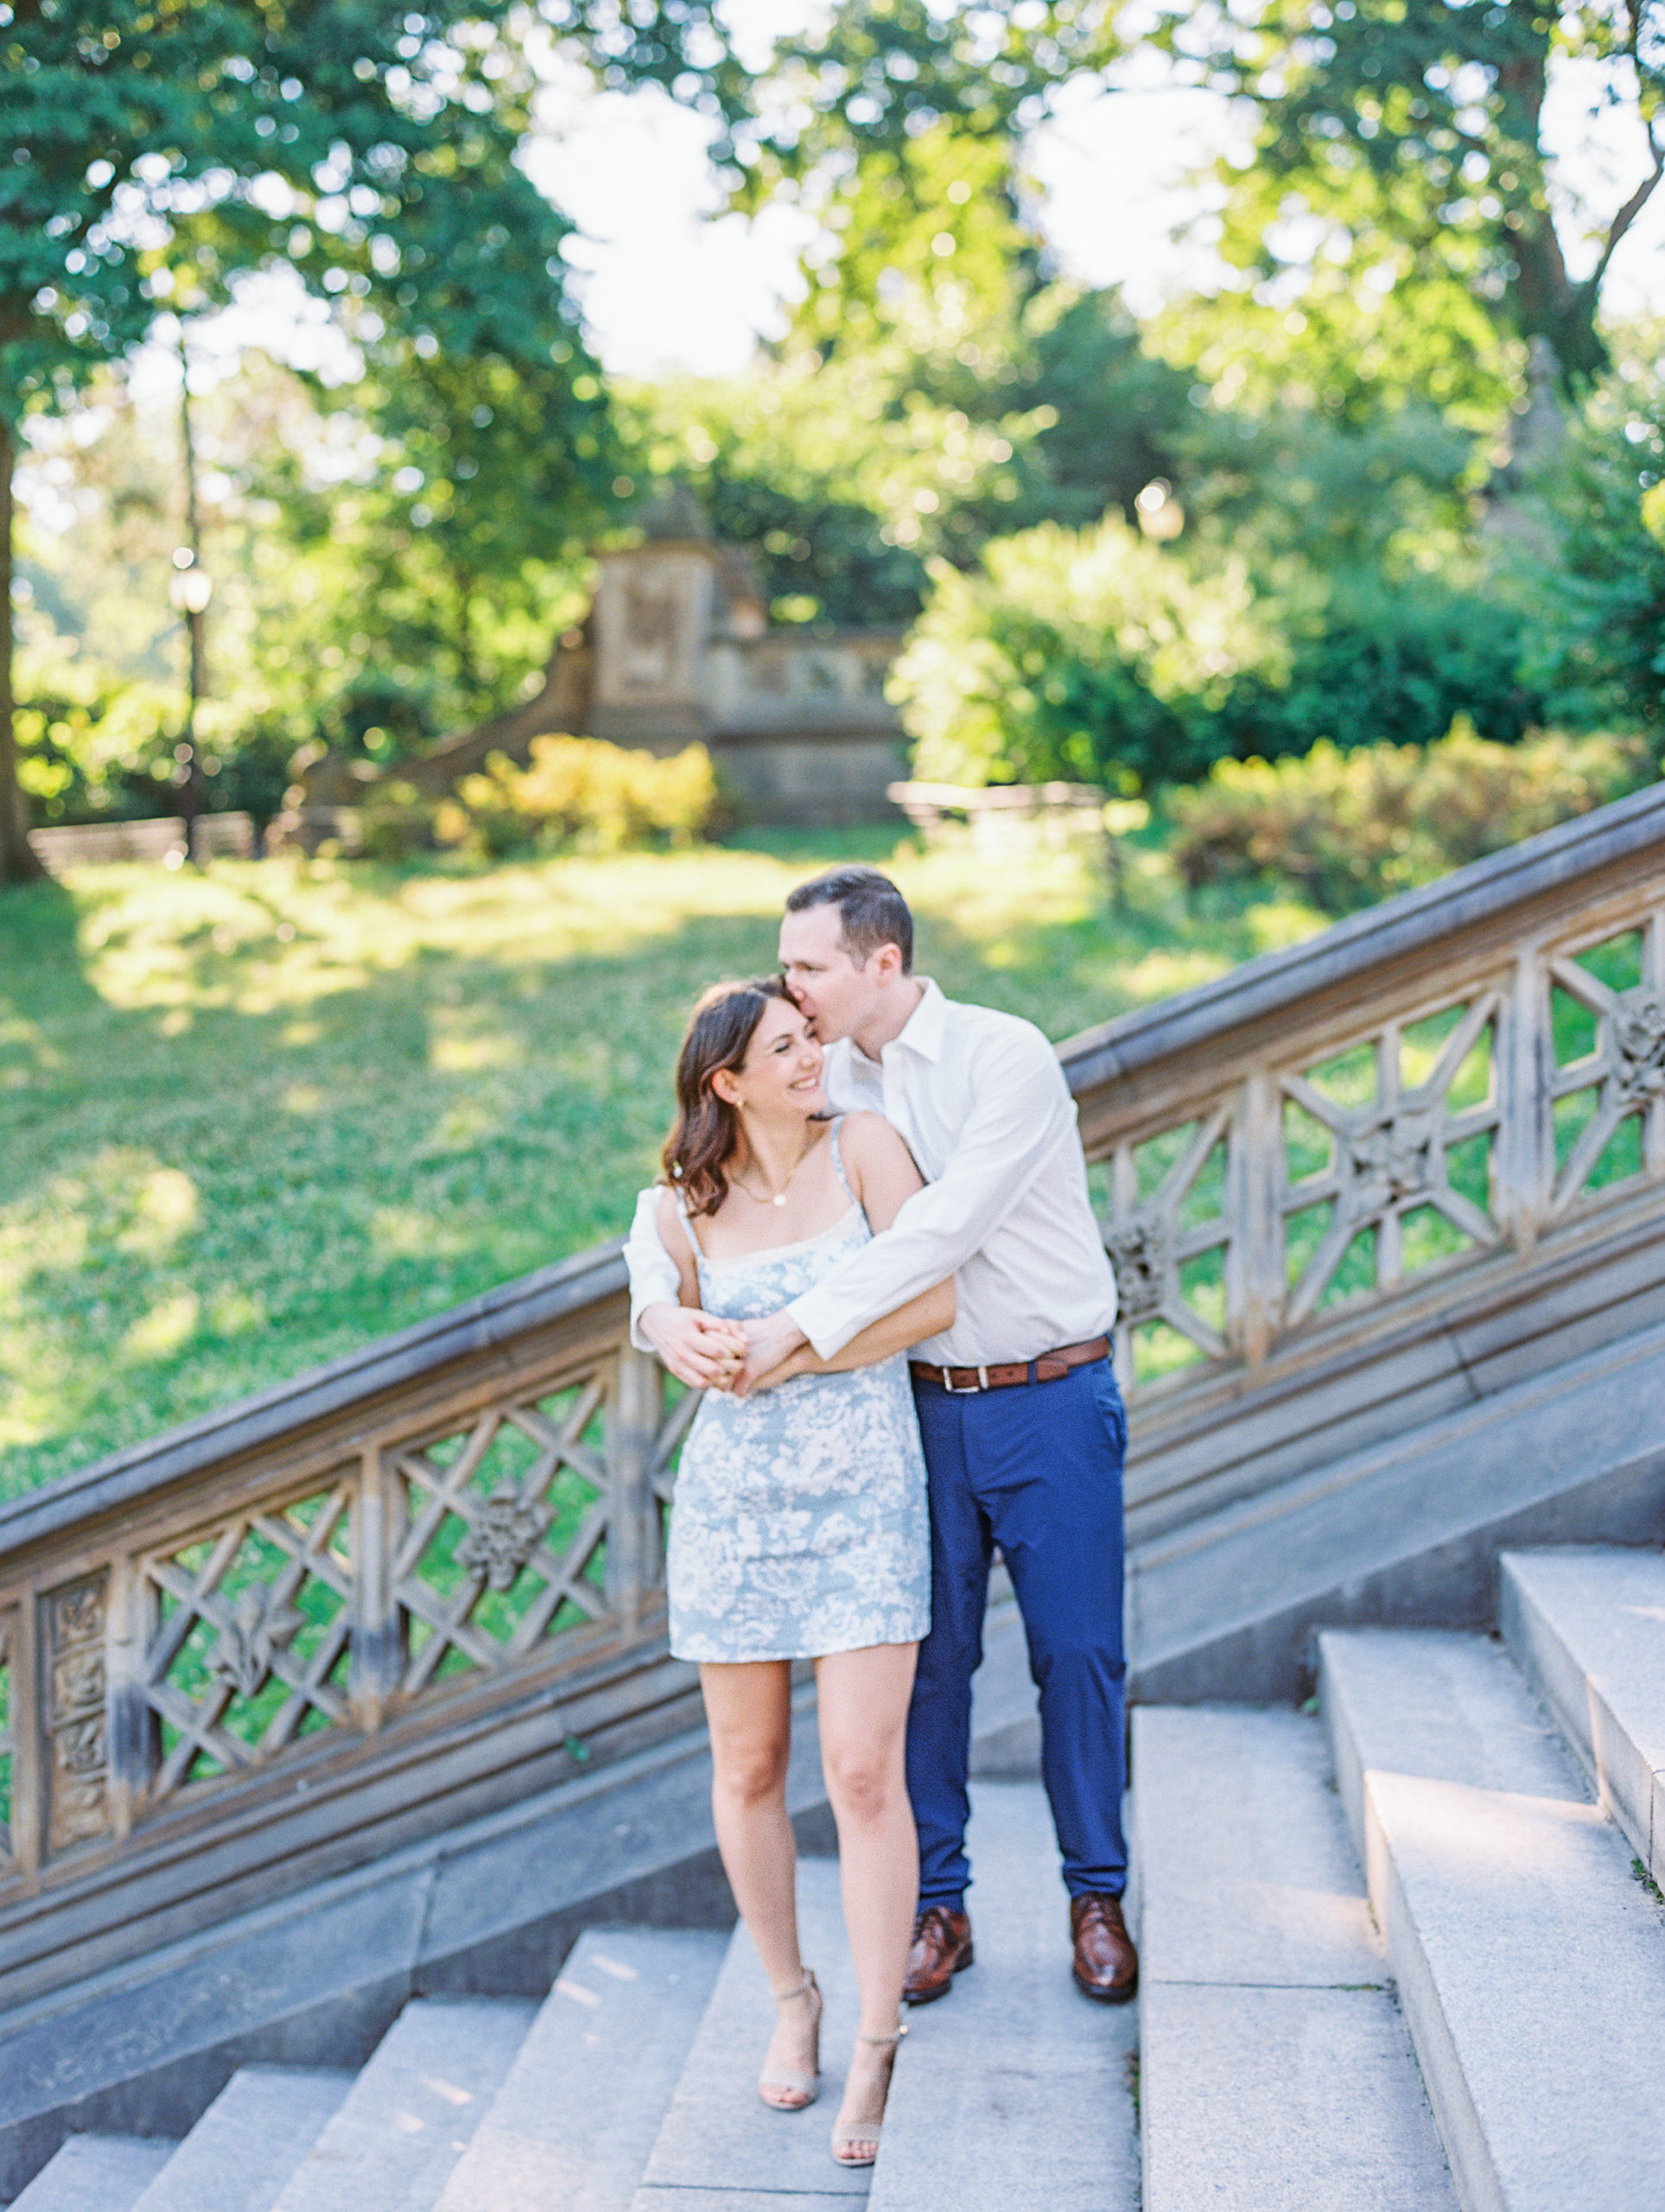 Couple embraces and gives a kiss on forehead on stone steps in Central Park for Central Park Engagement Photos